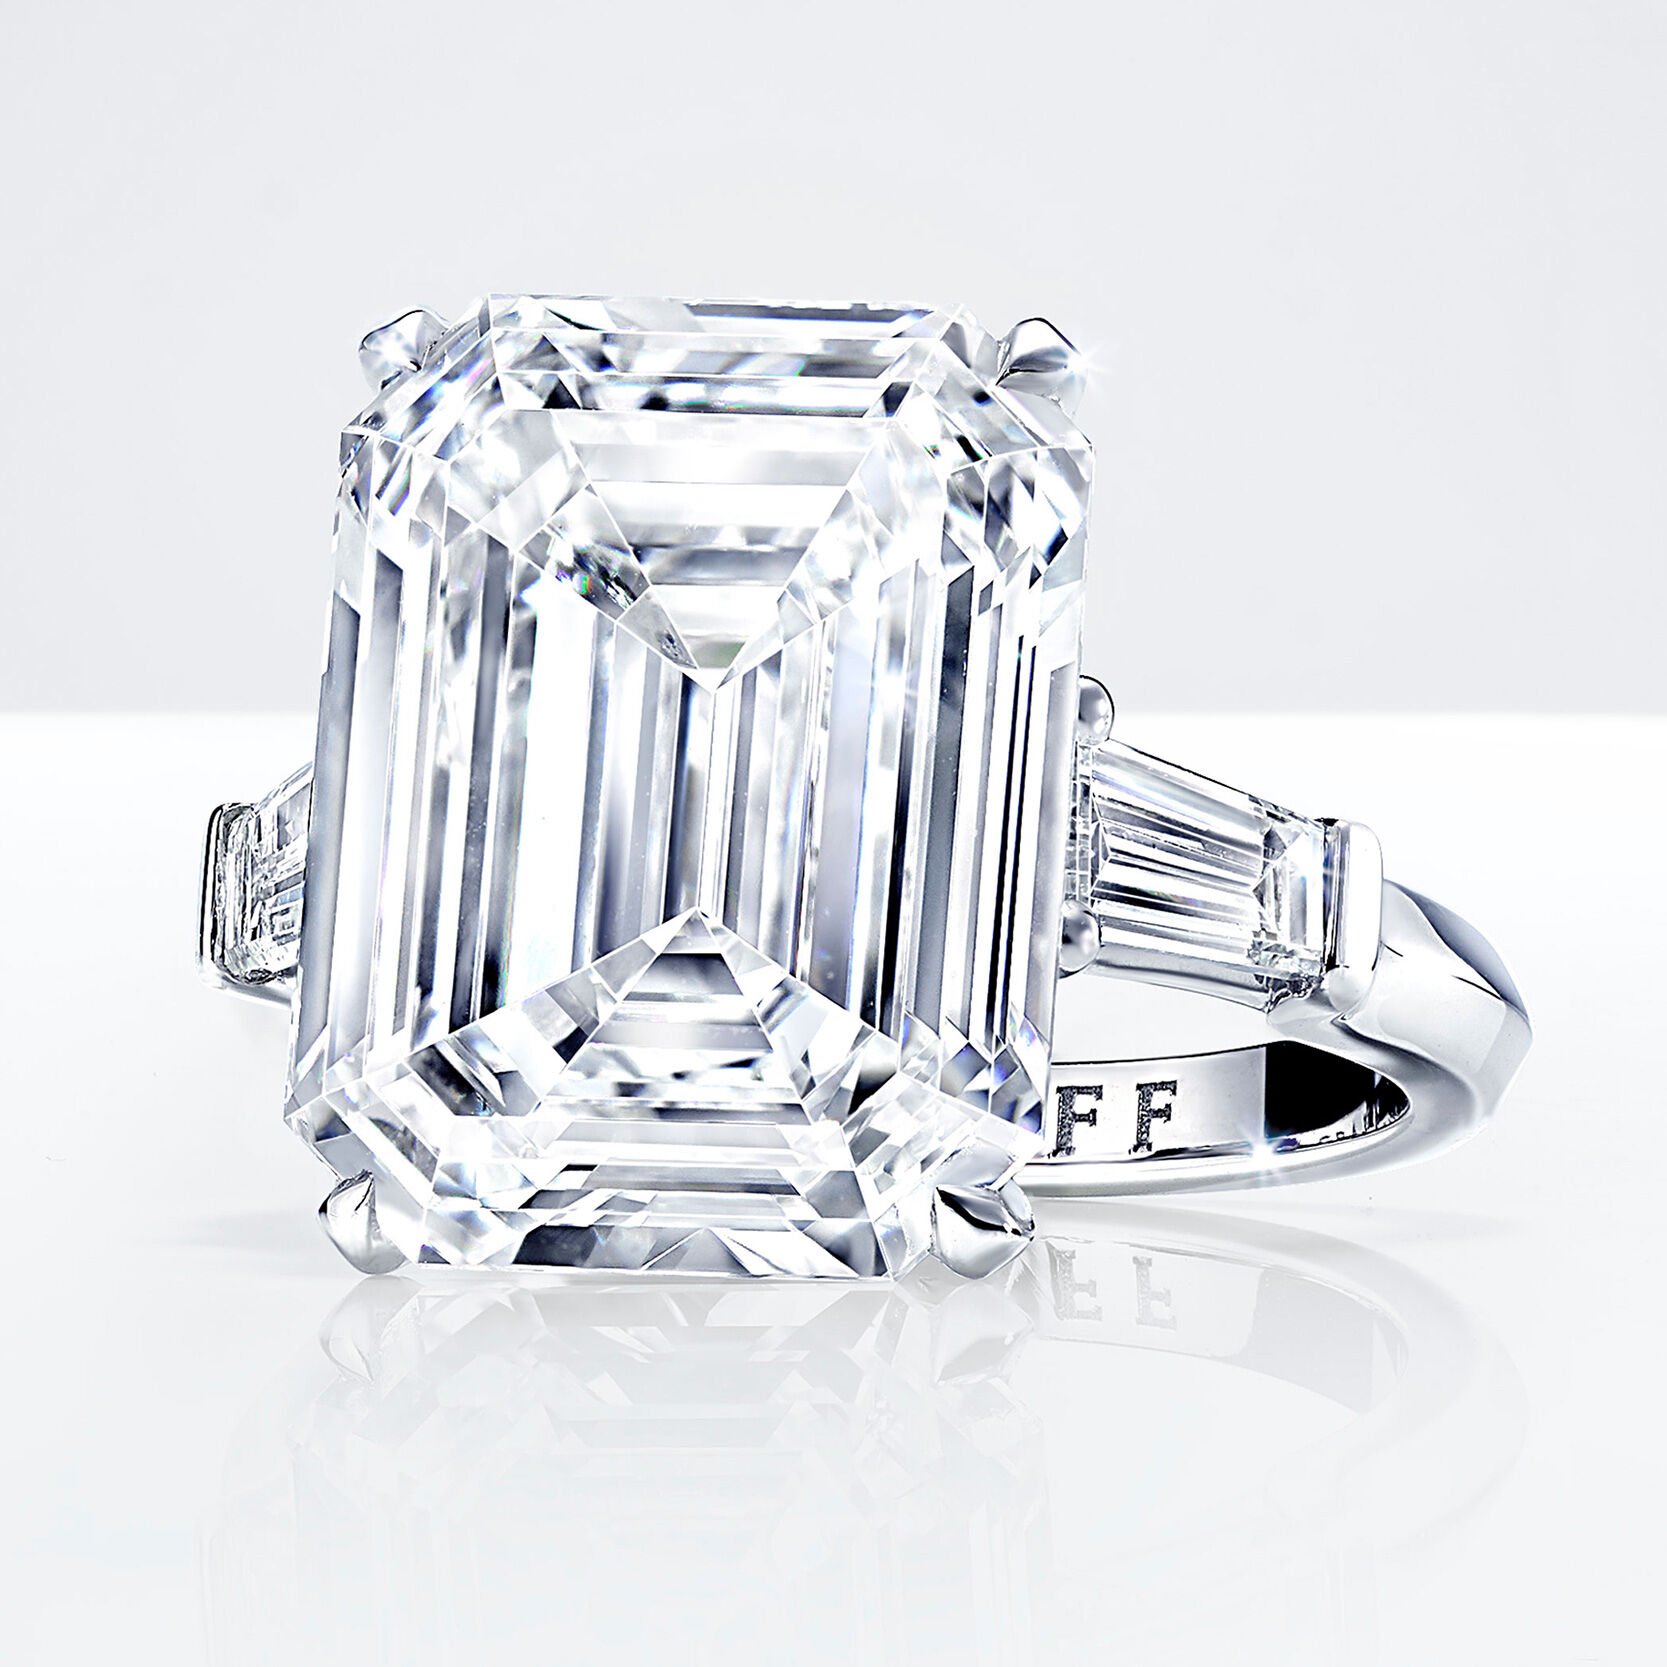 An emerald cut white diamond ring with baguette cut side stones